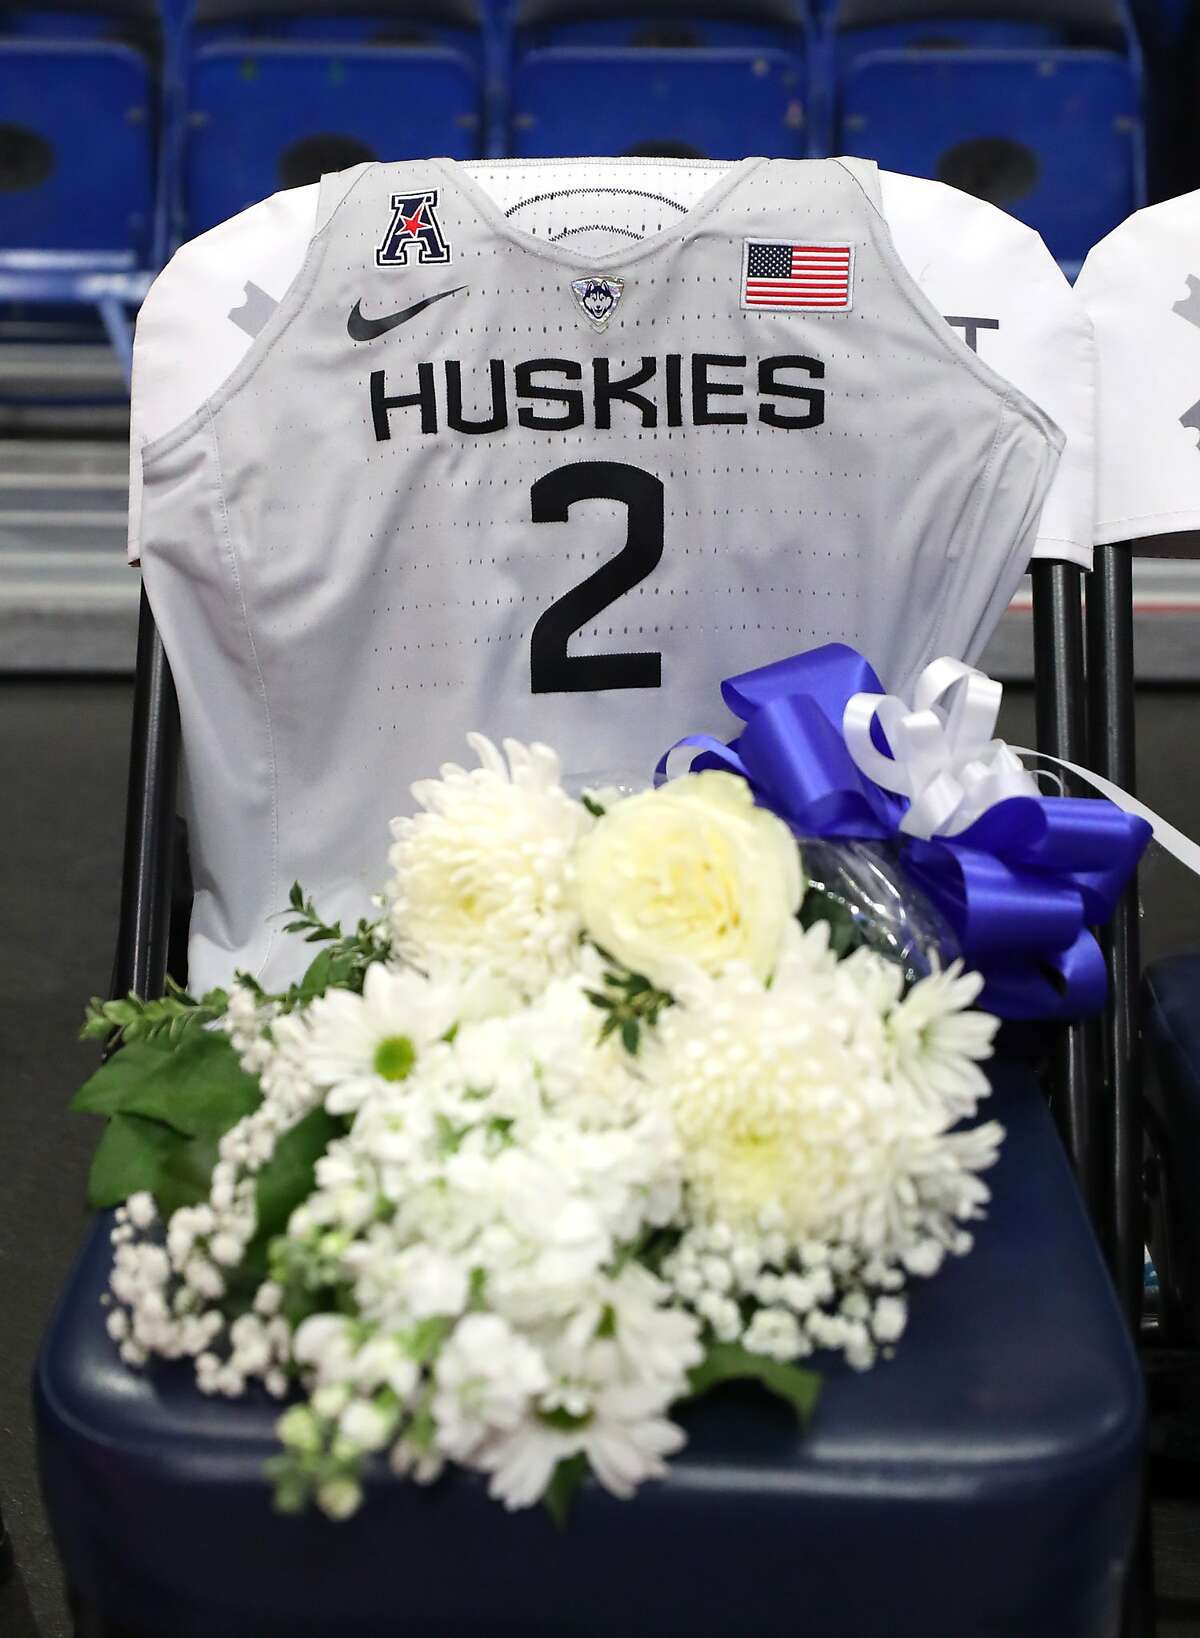 How Gianna Bryant Was Remembered by UConn Women's Basketball Team